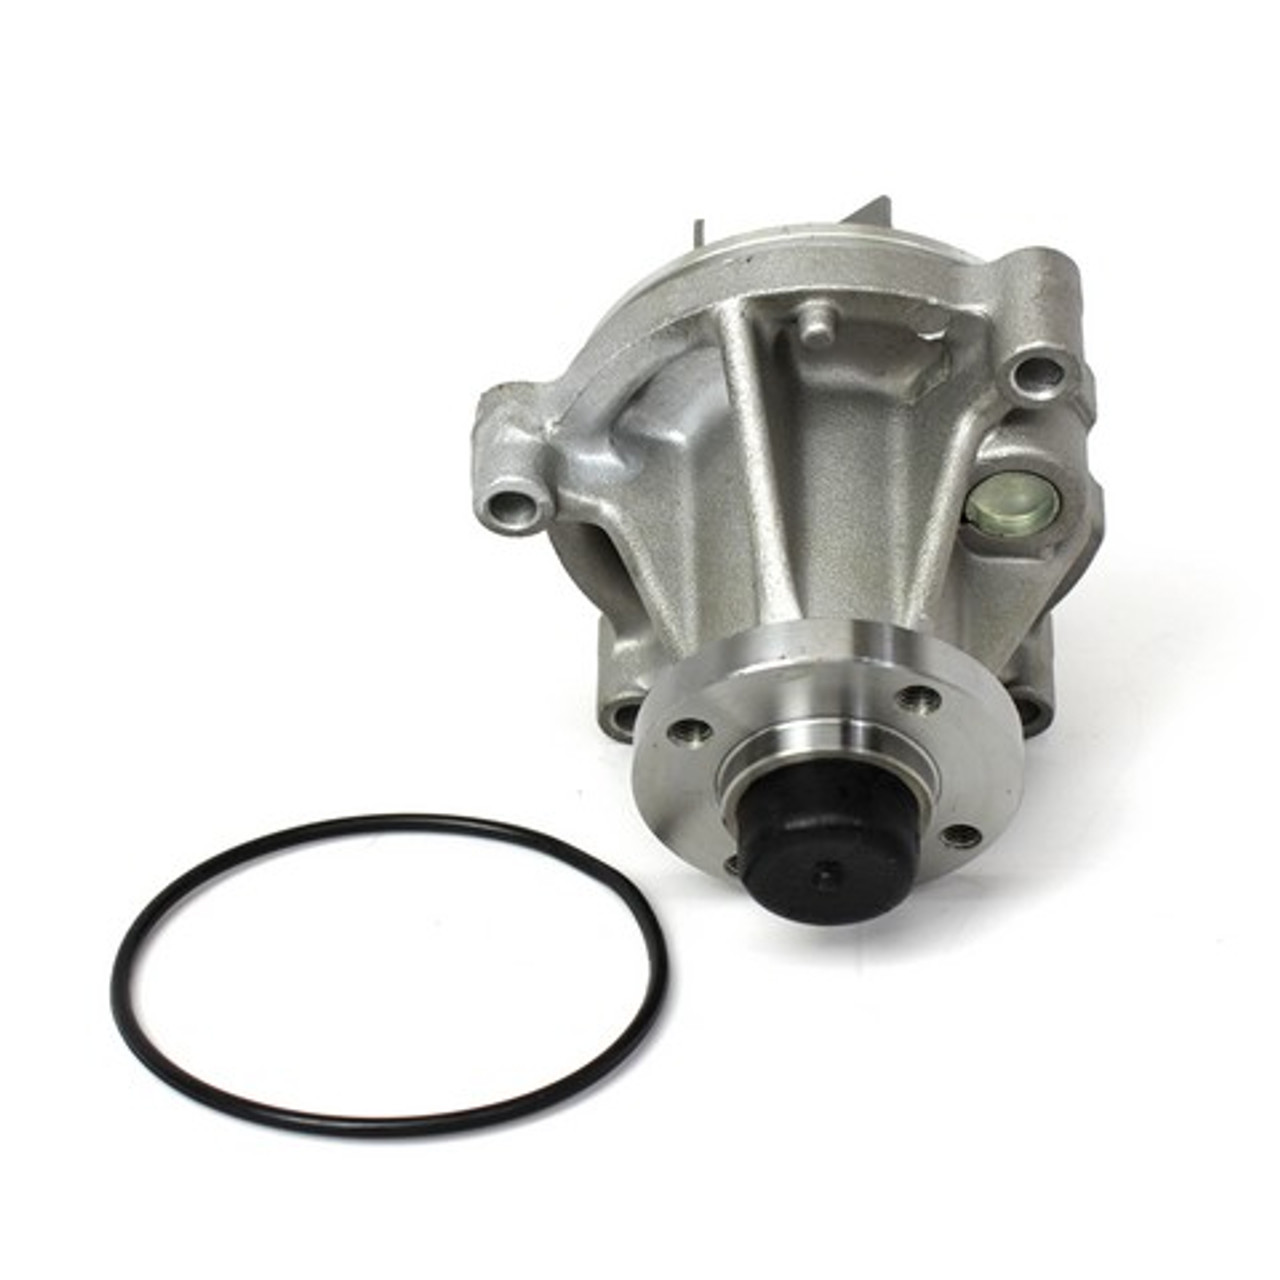 Water Pump 4.6L 2013 Ford E-150 - WP4170.27